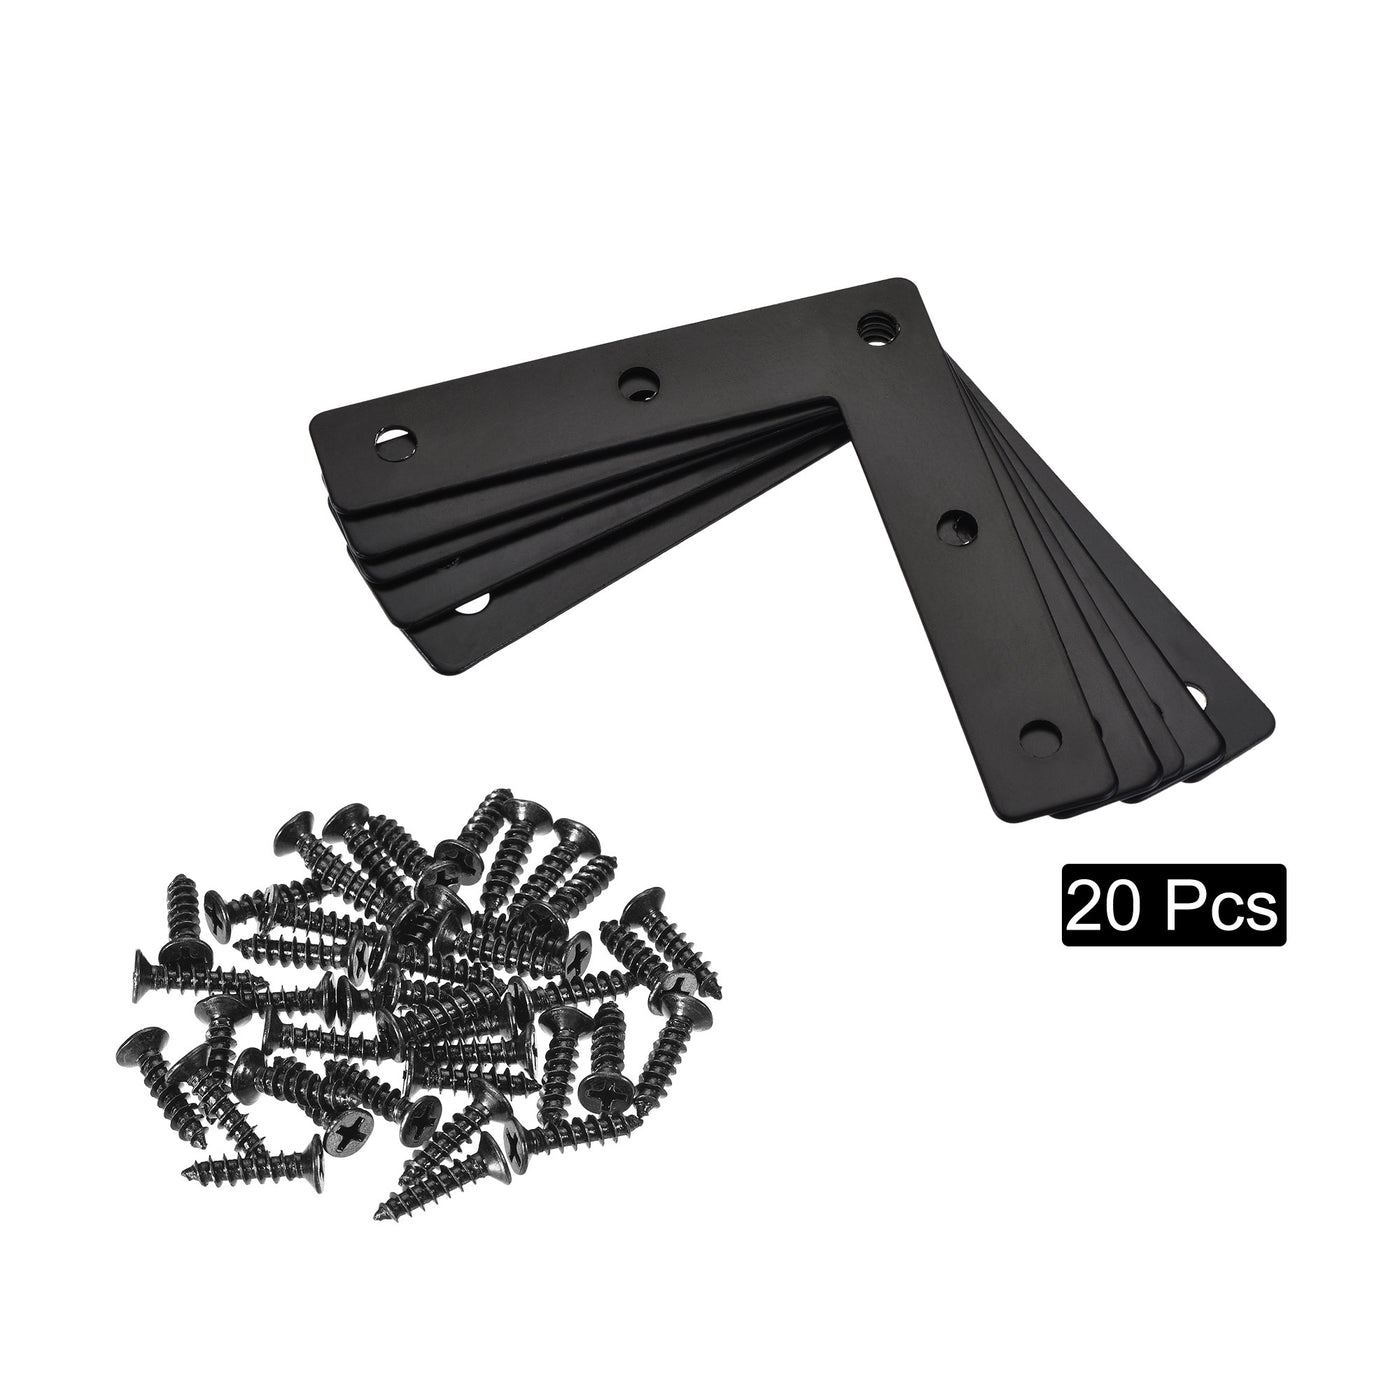 uxcell Uxcell L Shape Brace 80mmx80mm Mending Repairing Flat Brackets for Joint Fastener with Screws Black 20Pcs